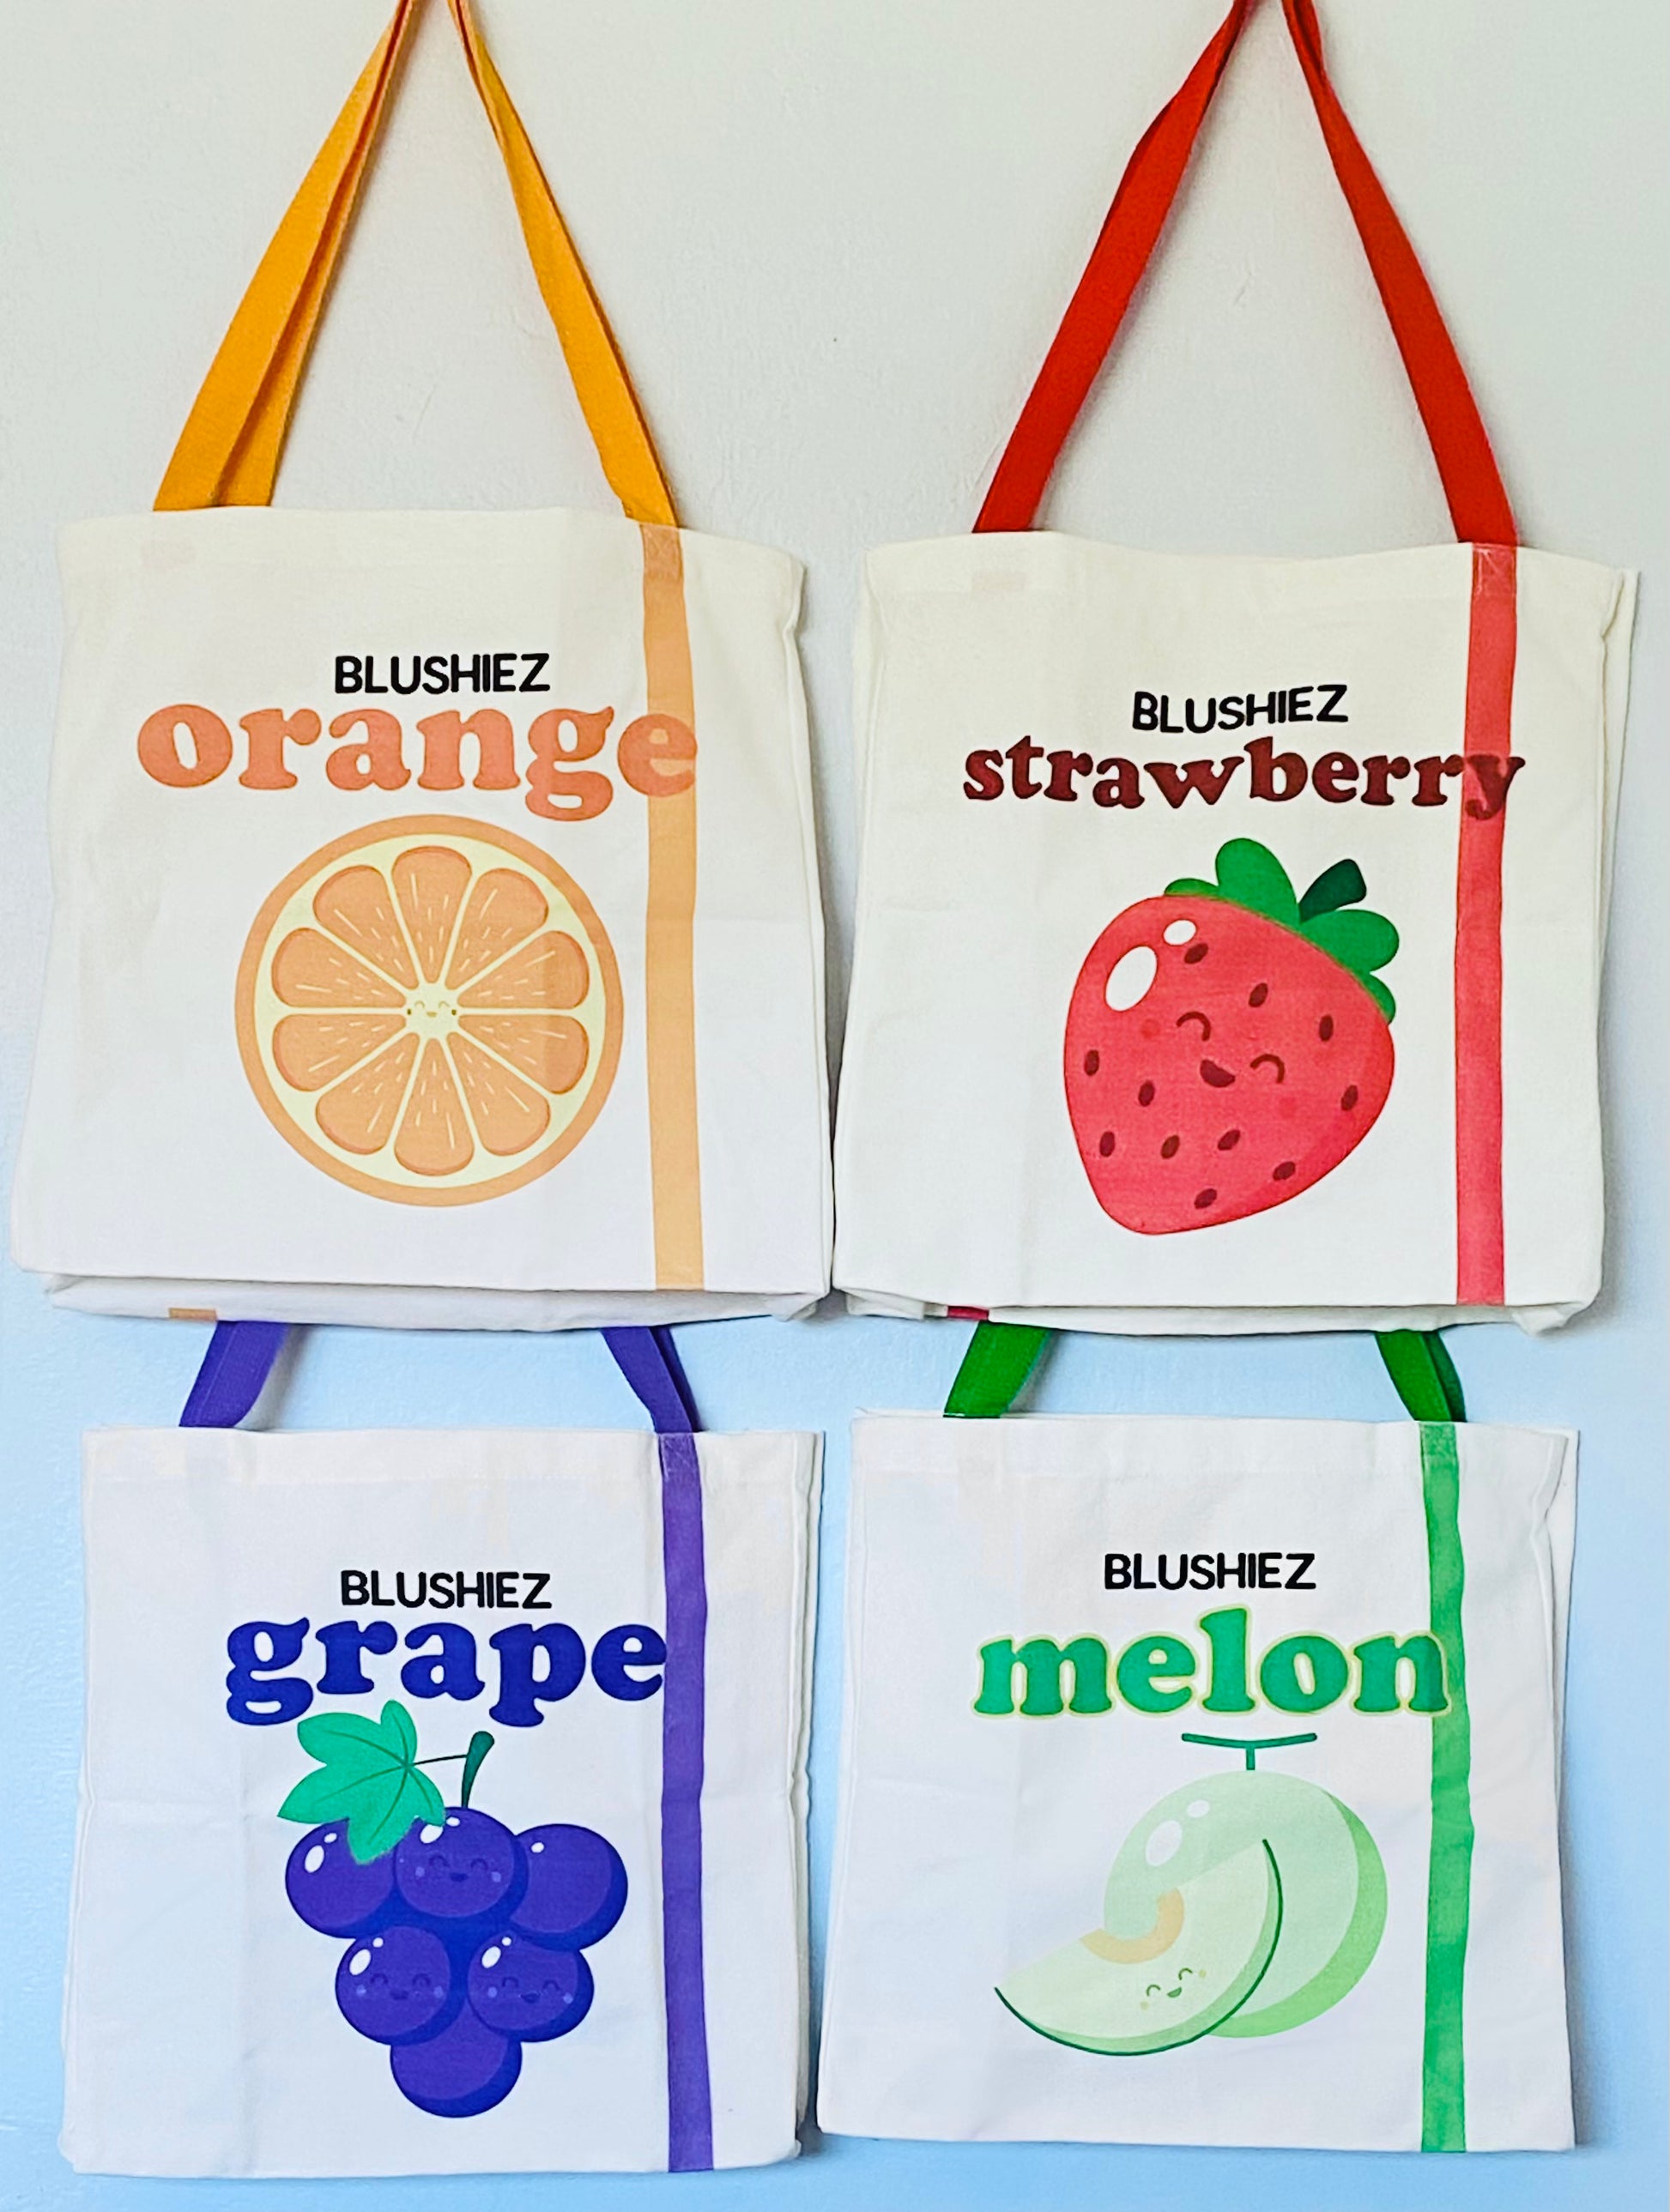 LIMITED EDITION - Asian Fruity Bubblegum Tote Bags – Blushiez